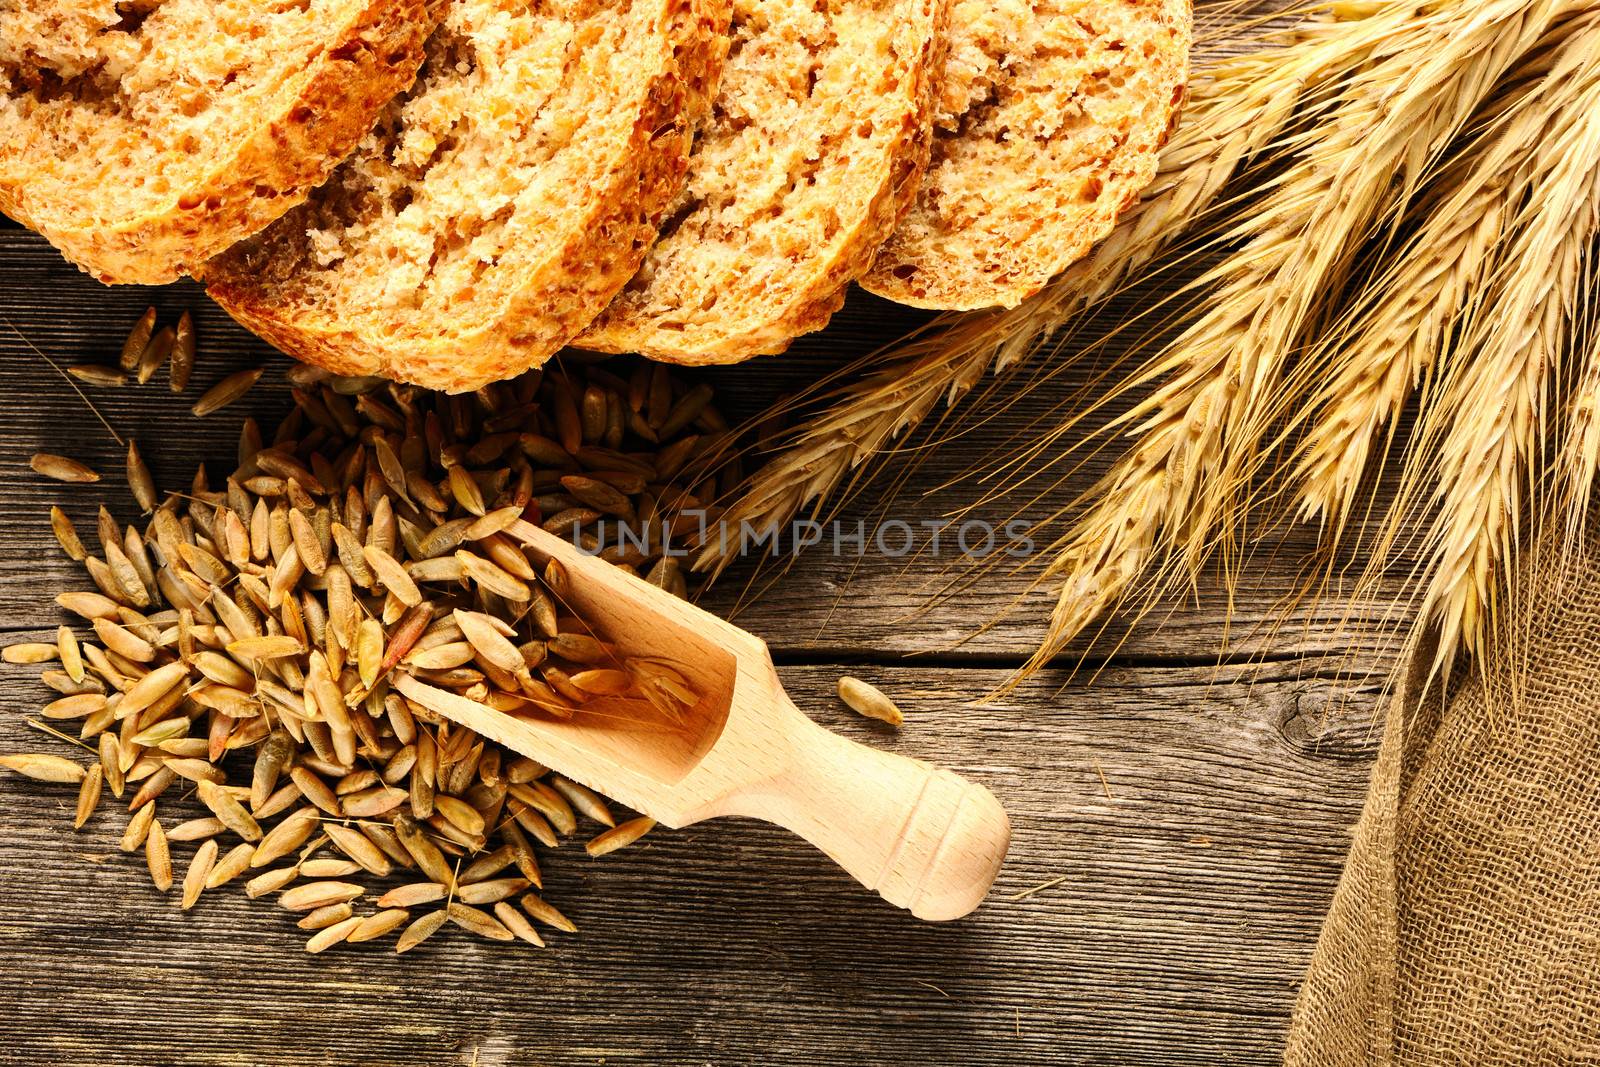 Rye spikelets and sliced bread on wooden background